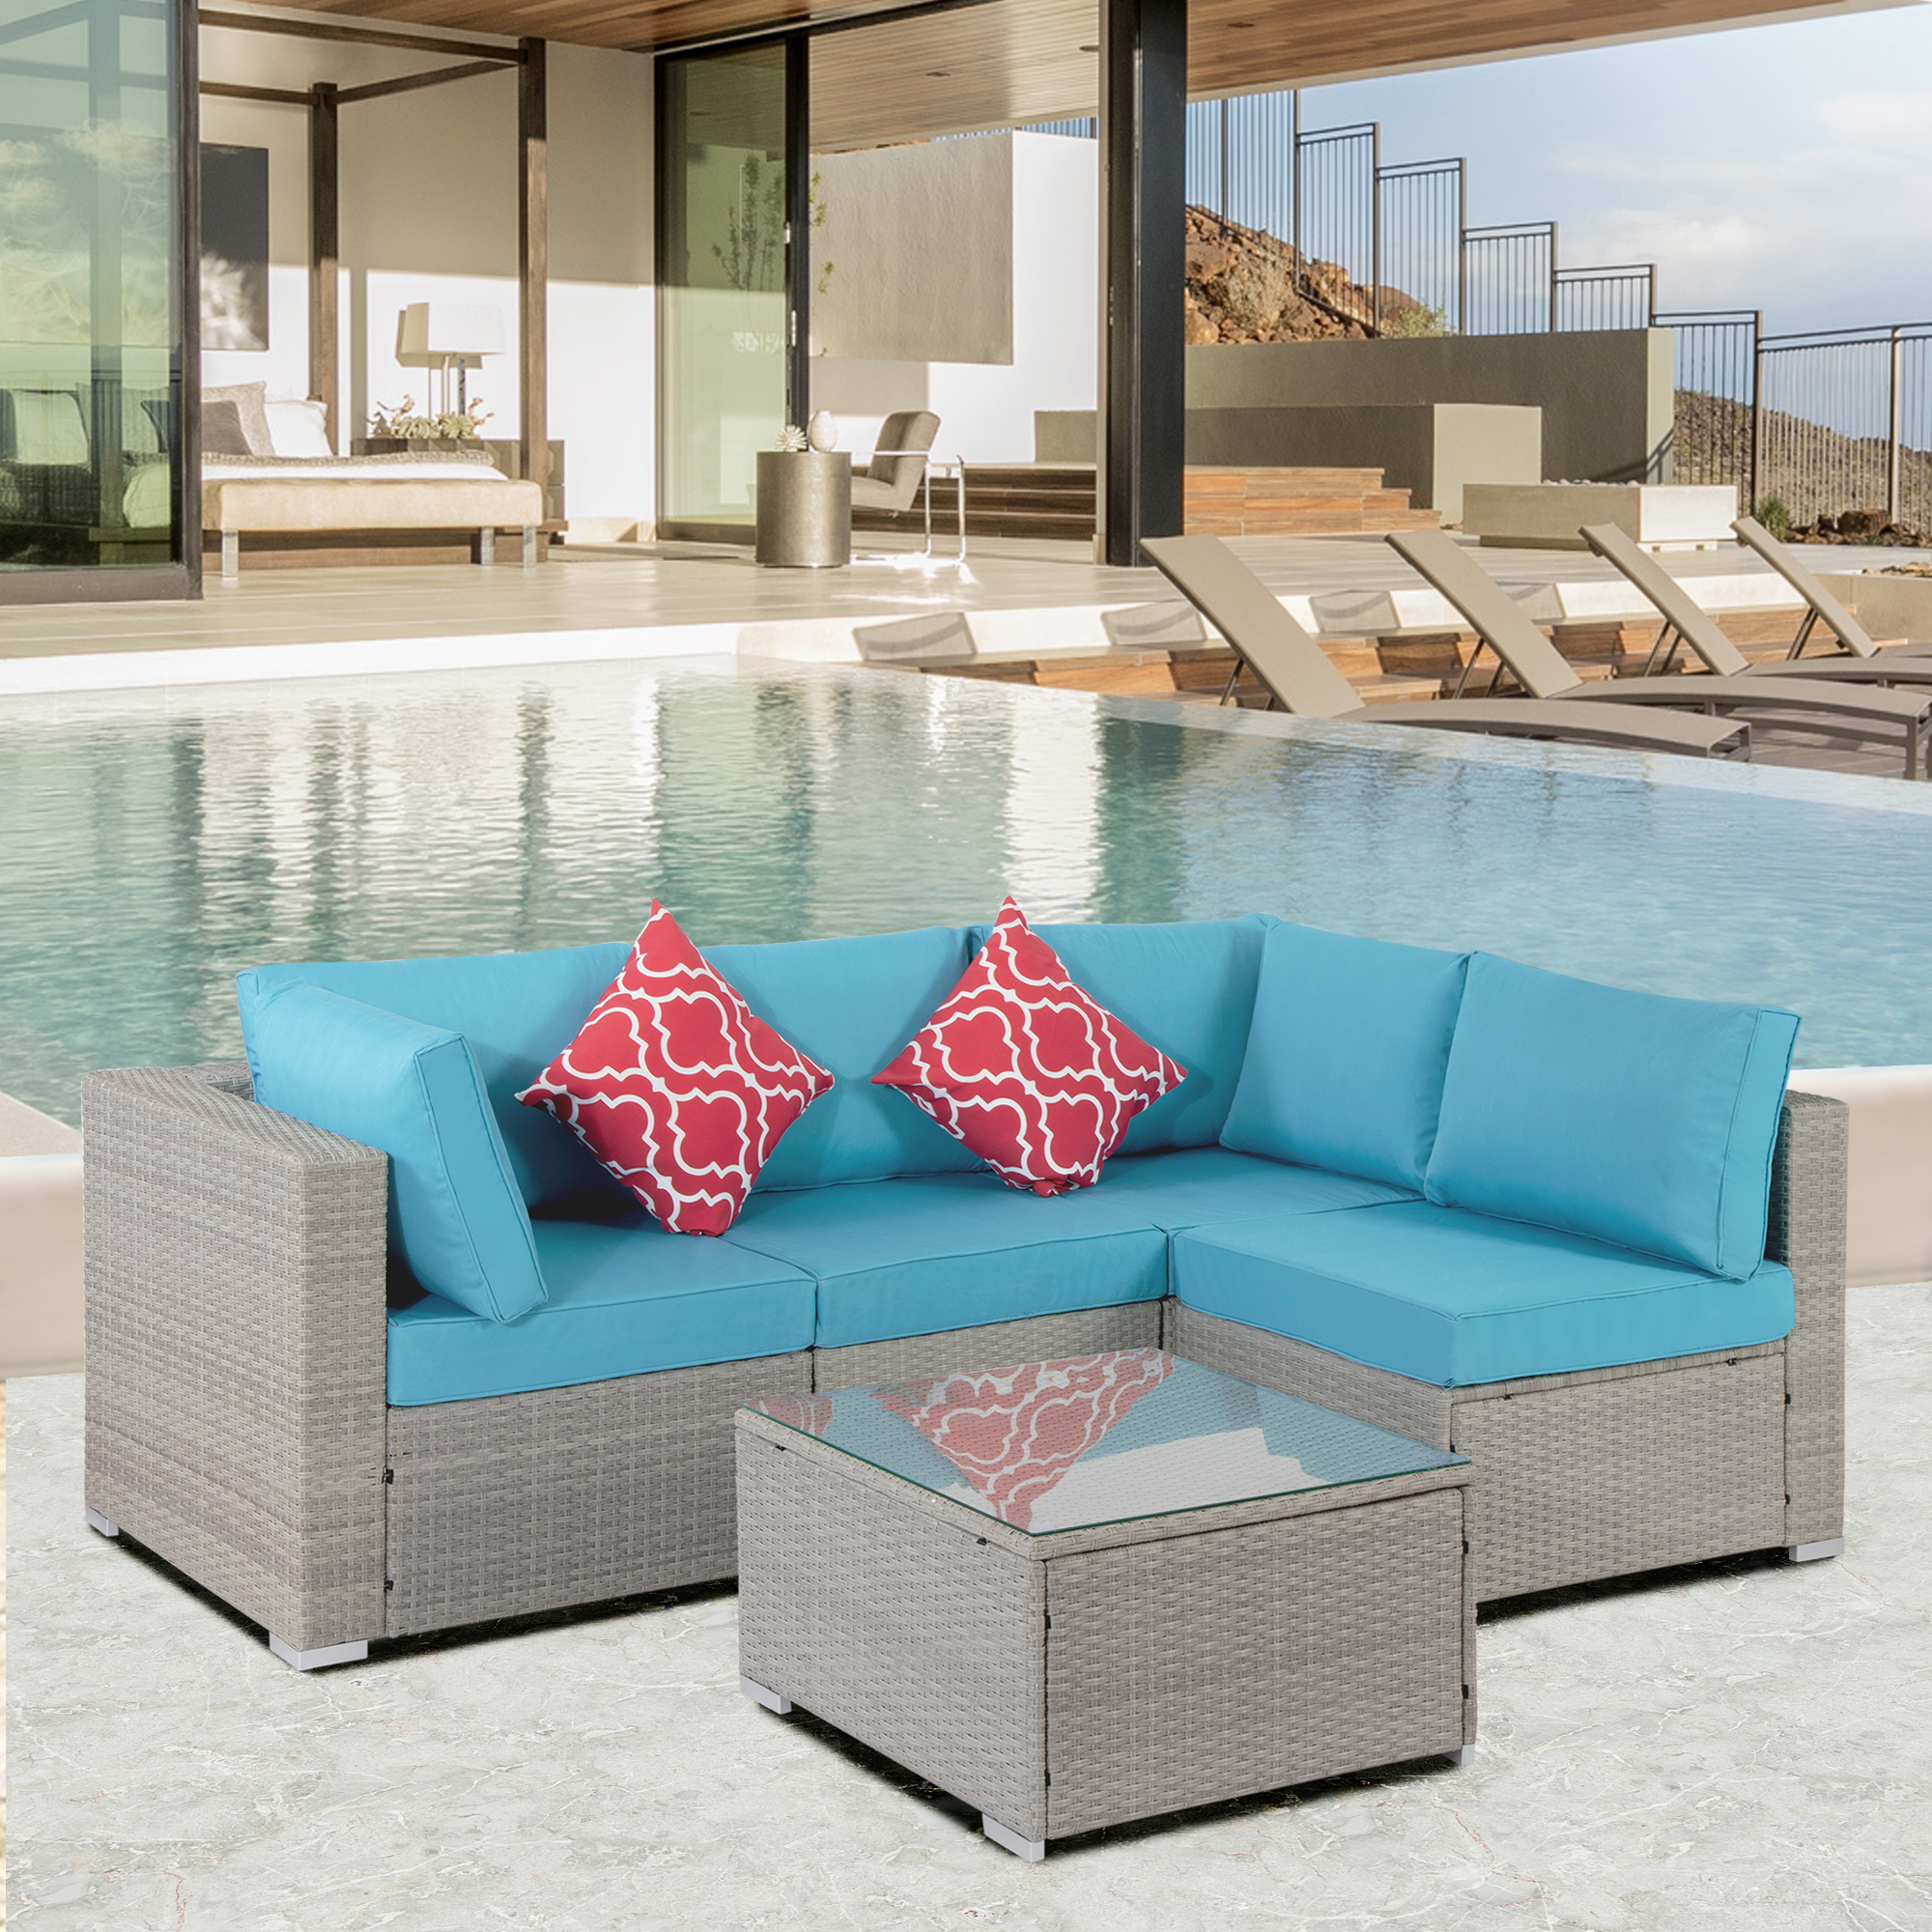 Outdoor Garden Patio Furniture 5-Piece PE Rattan Wicker Sectional Cushioned Sofa Sets with 2 Pillows and Coffee Table-CASAINC